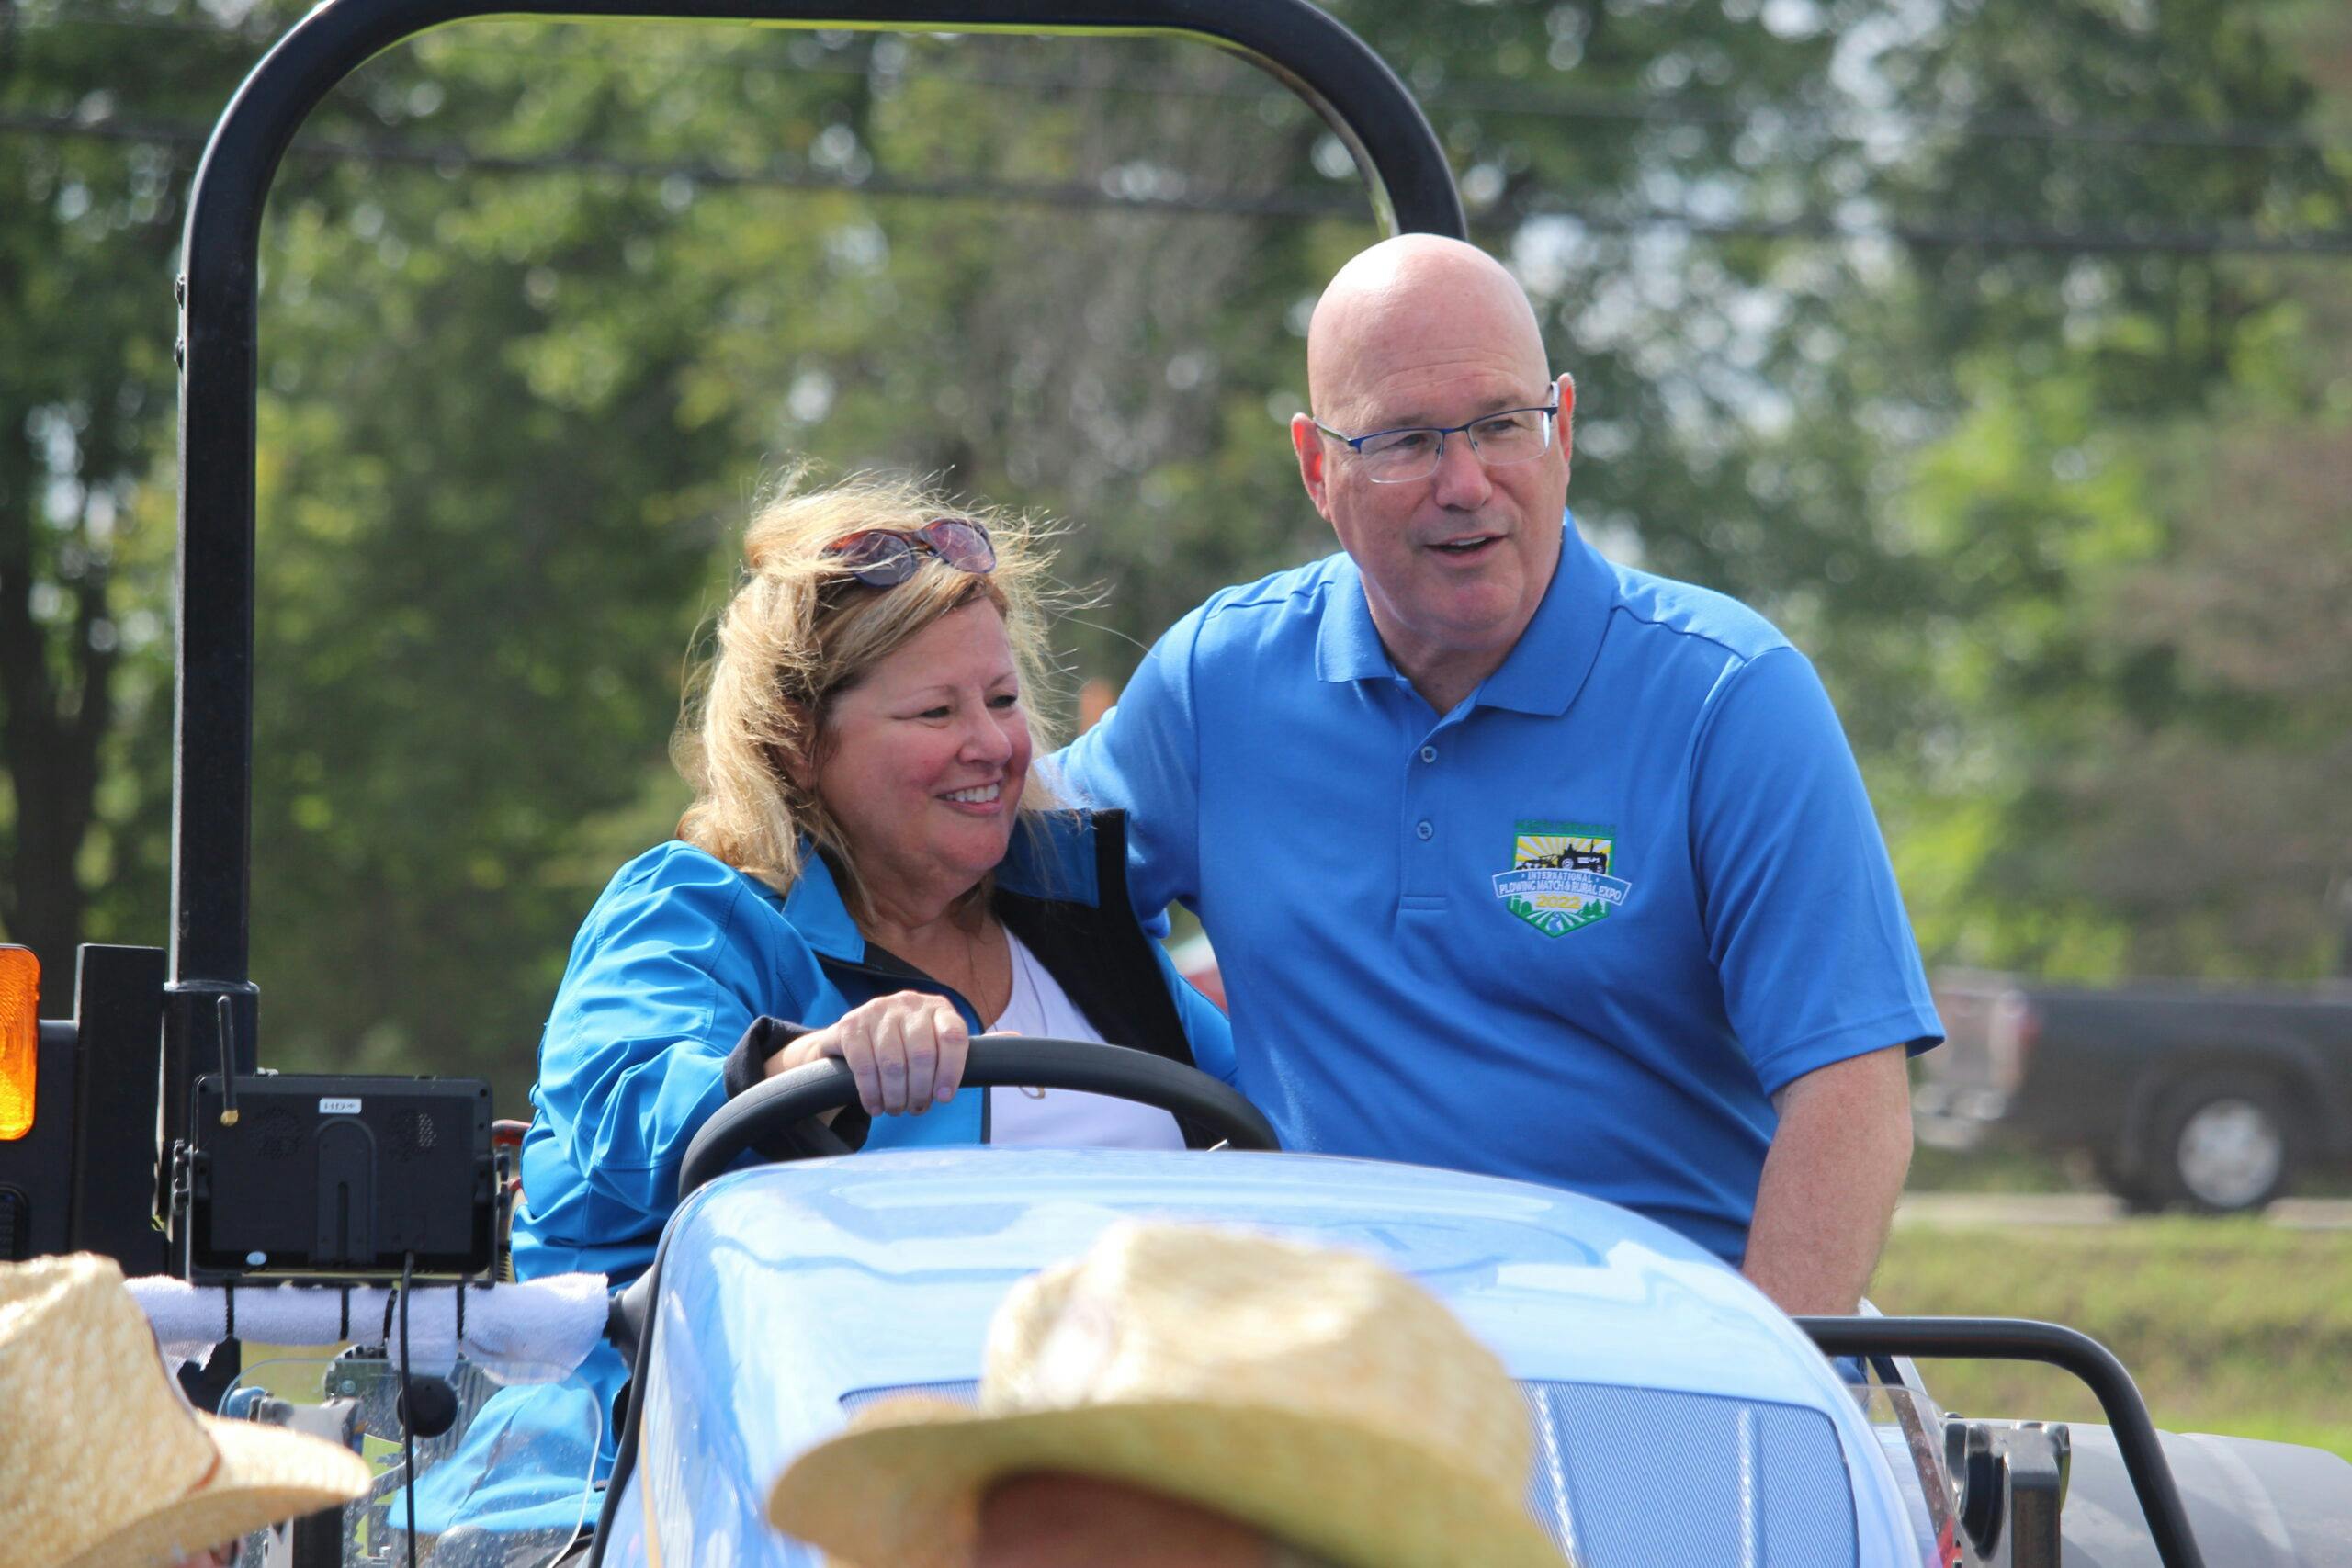 Clark, Thompson heckled at otherwise easygoing Plowing Match